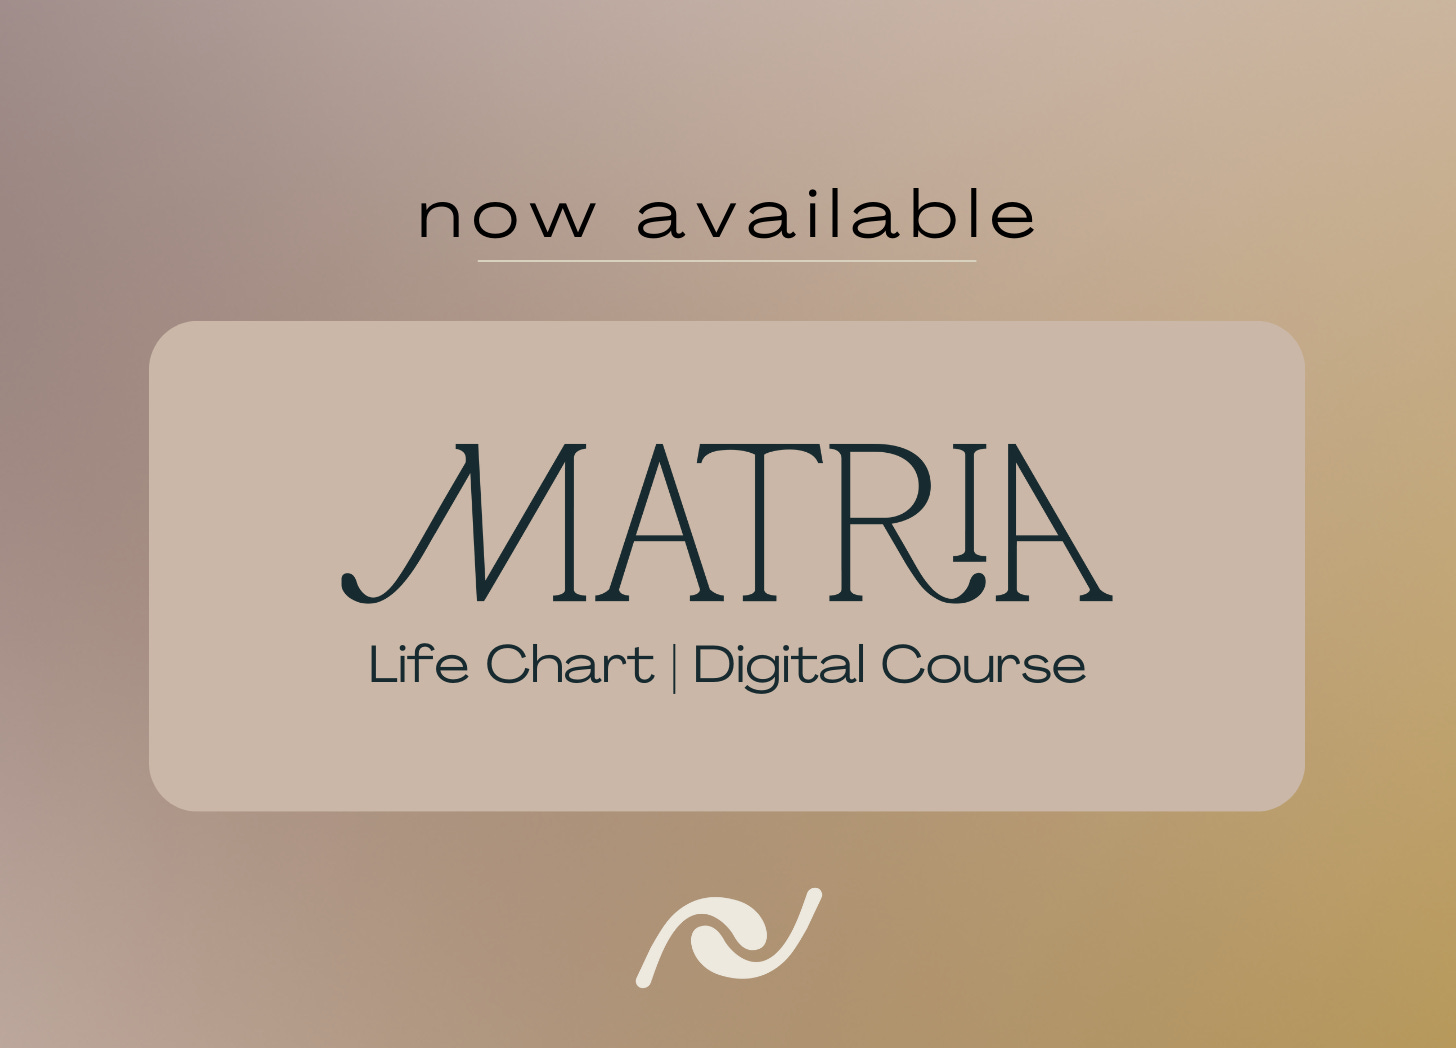 Matria Life Chart digital course is now available 